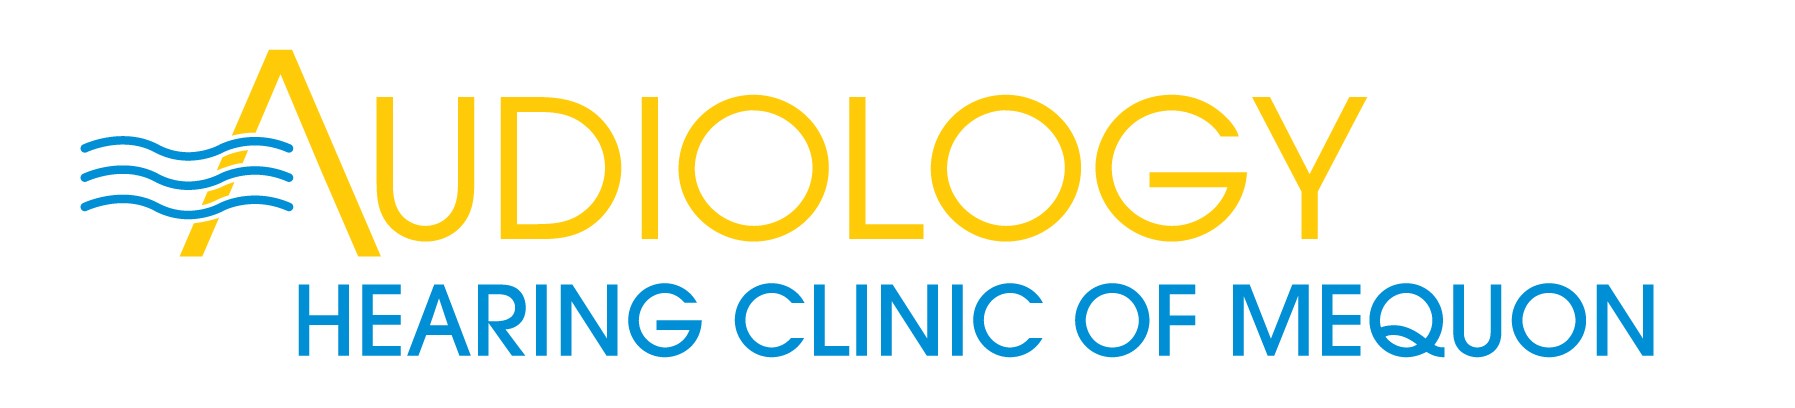 Audiology Hearing Clinic of Mequon logo.jpg